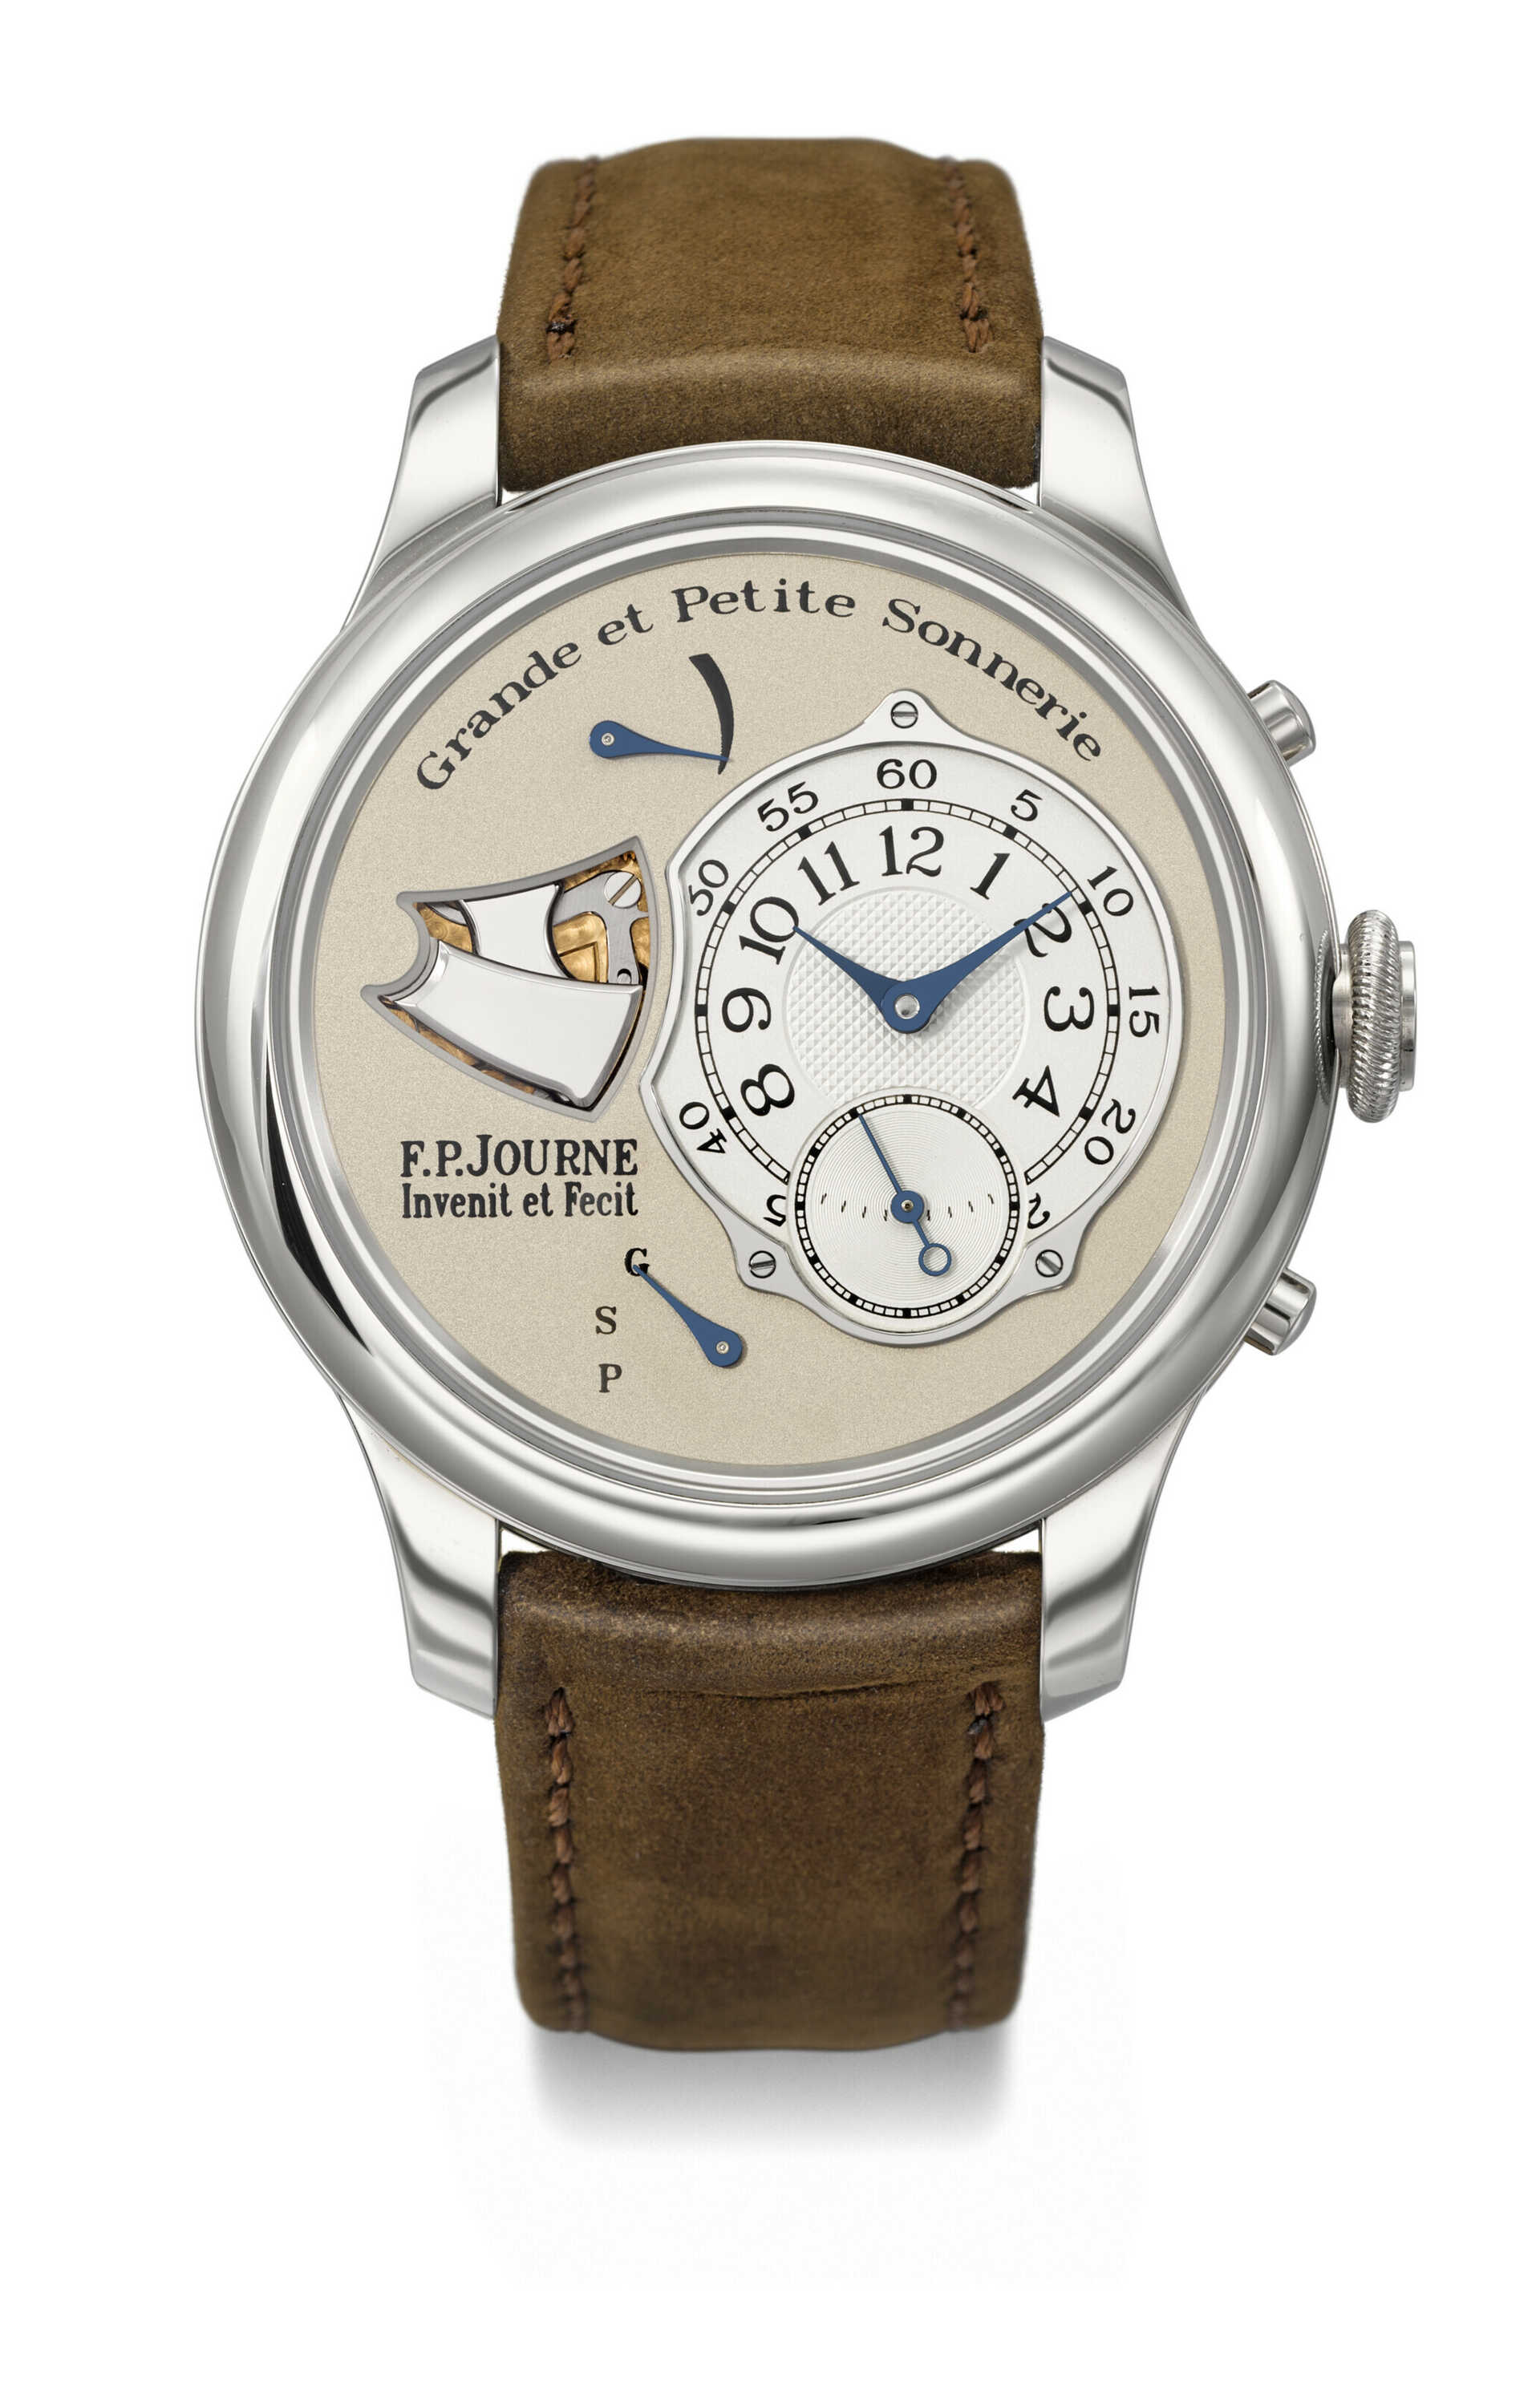 F.P. JOURNE. AN IMPORTANT AND VERY RARE STAINLESS STEEL GRANDE AND PETITE SONNERIE MINUTE REPEATING WRISTWATCH WITH POWER RESERVE